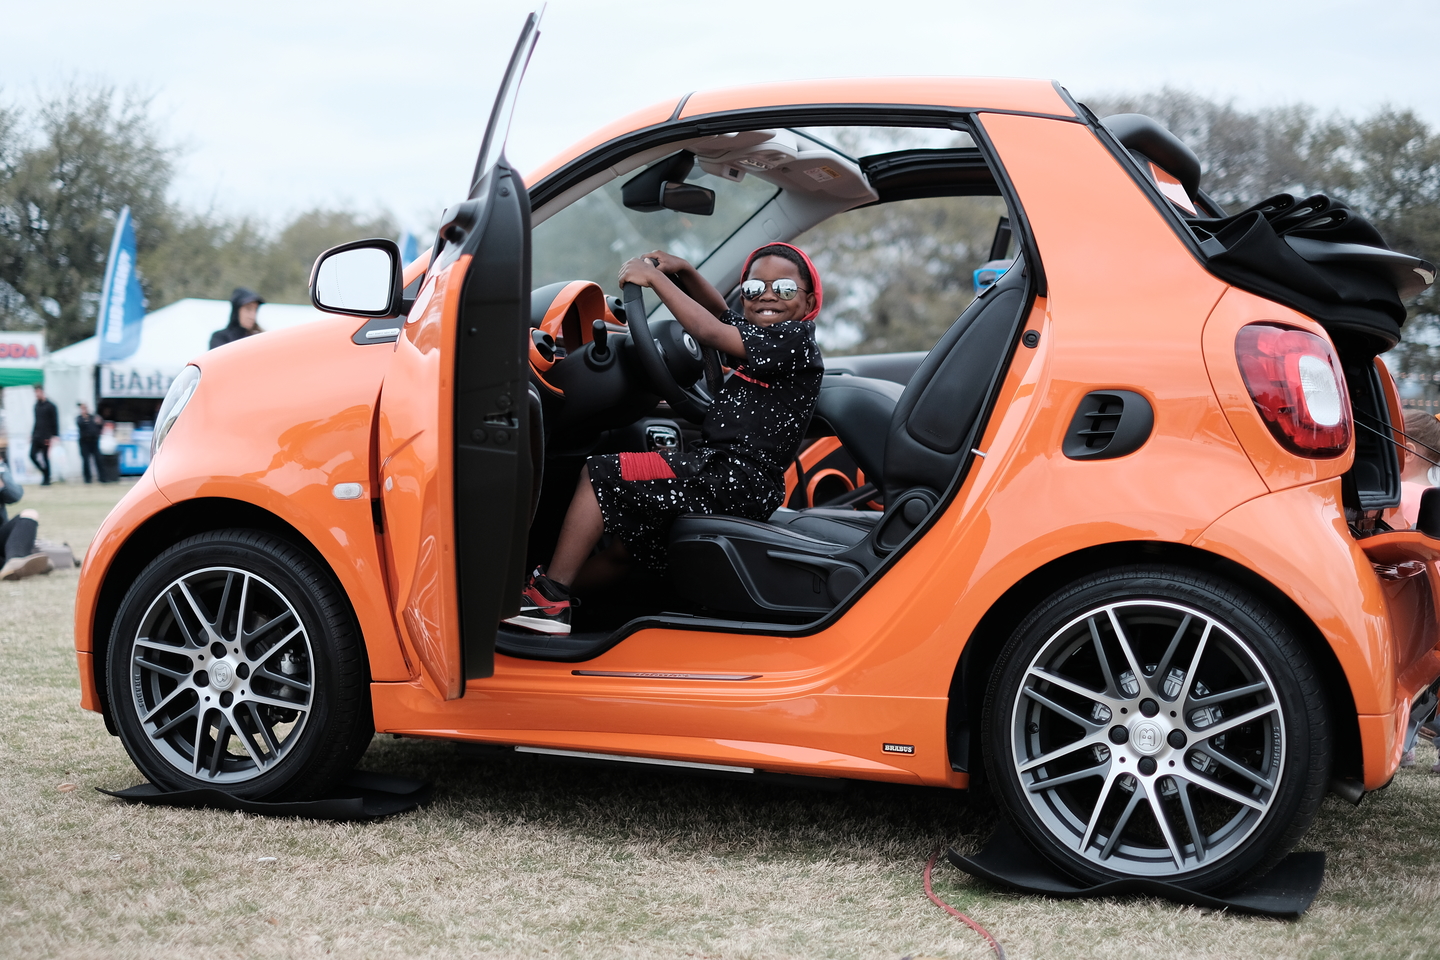 Palm Park was the place to check out the latest smart cars at SXSW. Photo by Geoff Duncan